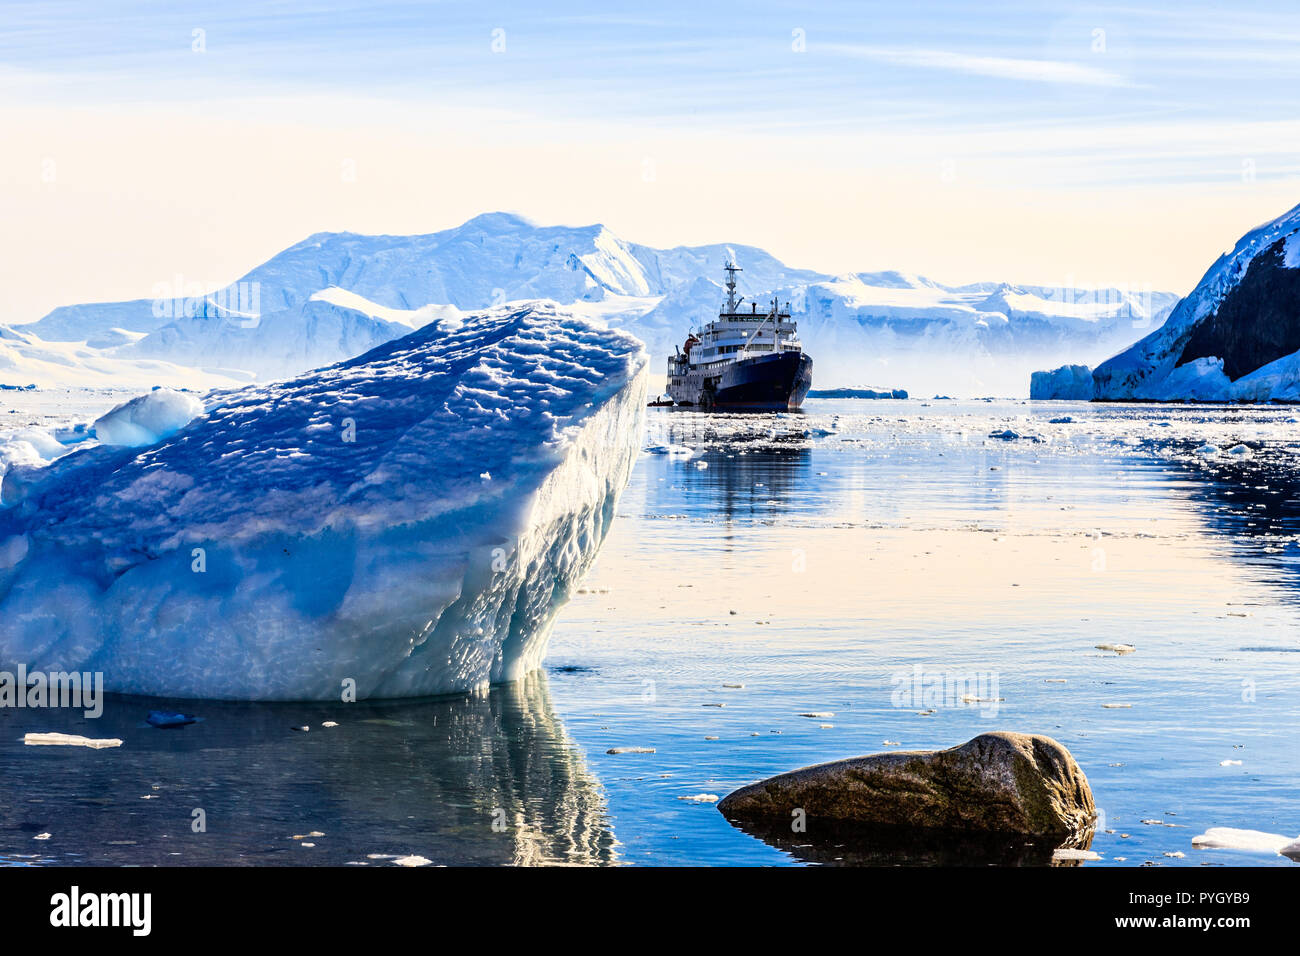 Touristic antarctic cruise ship among the icebergs with glacier in background, Neco bay, Antarctica Stock Photo